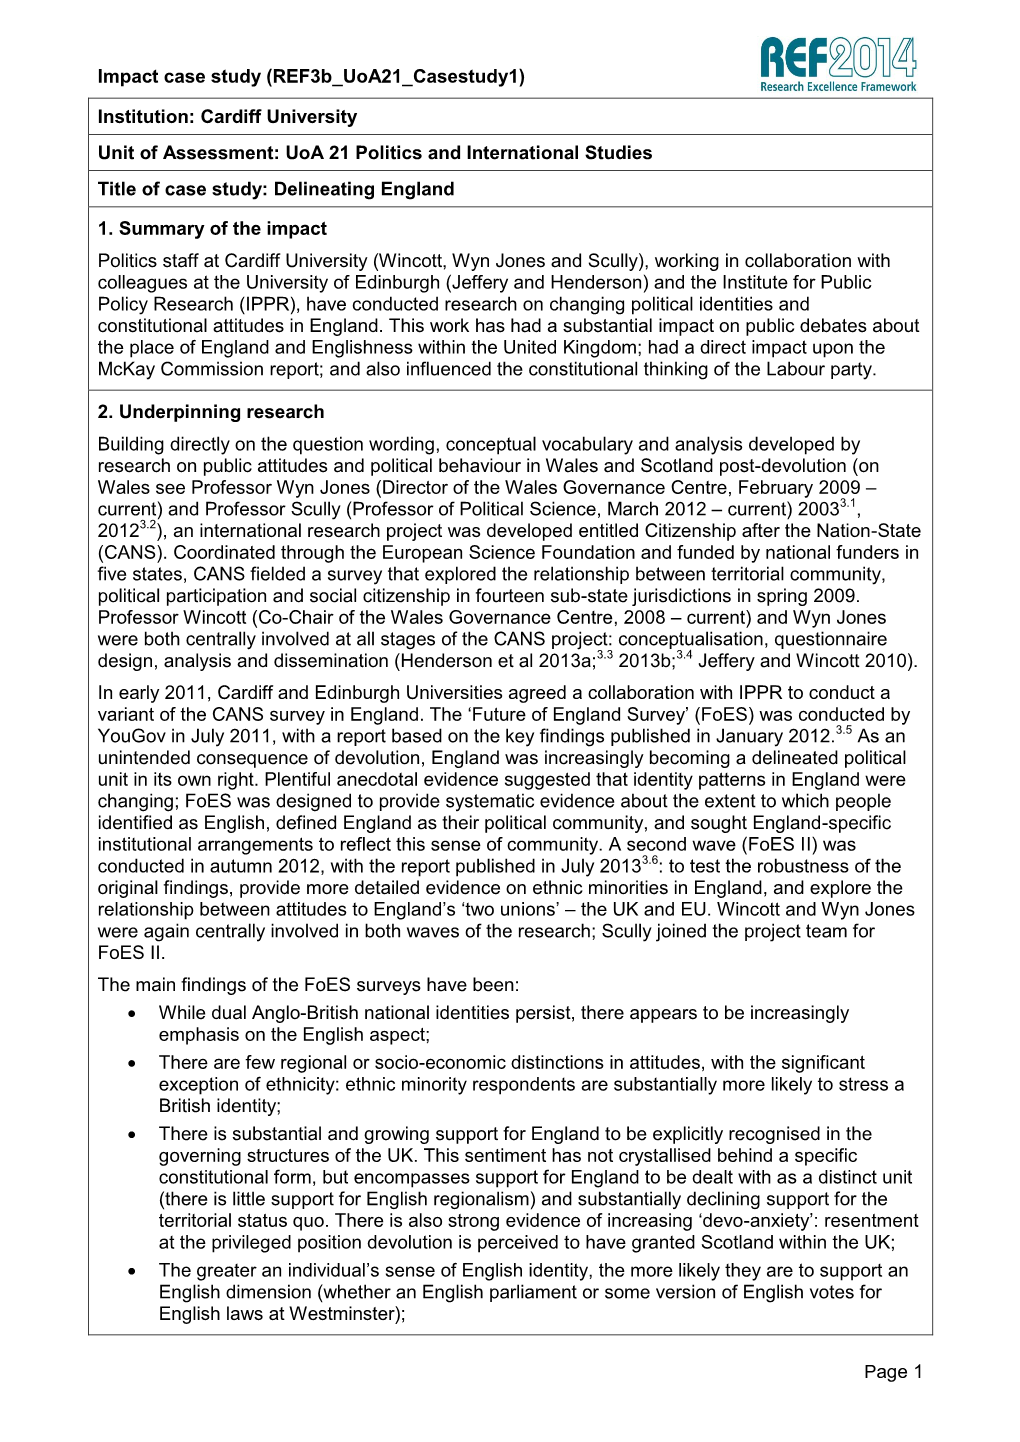 Impact Case Study (Ref3b Uoa21 Casestudy1) Page 1 Institution